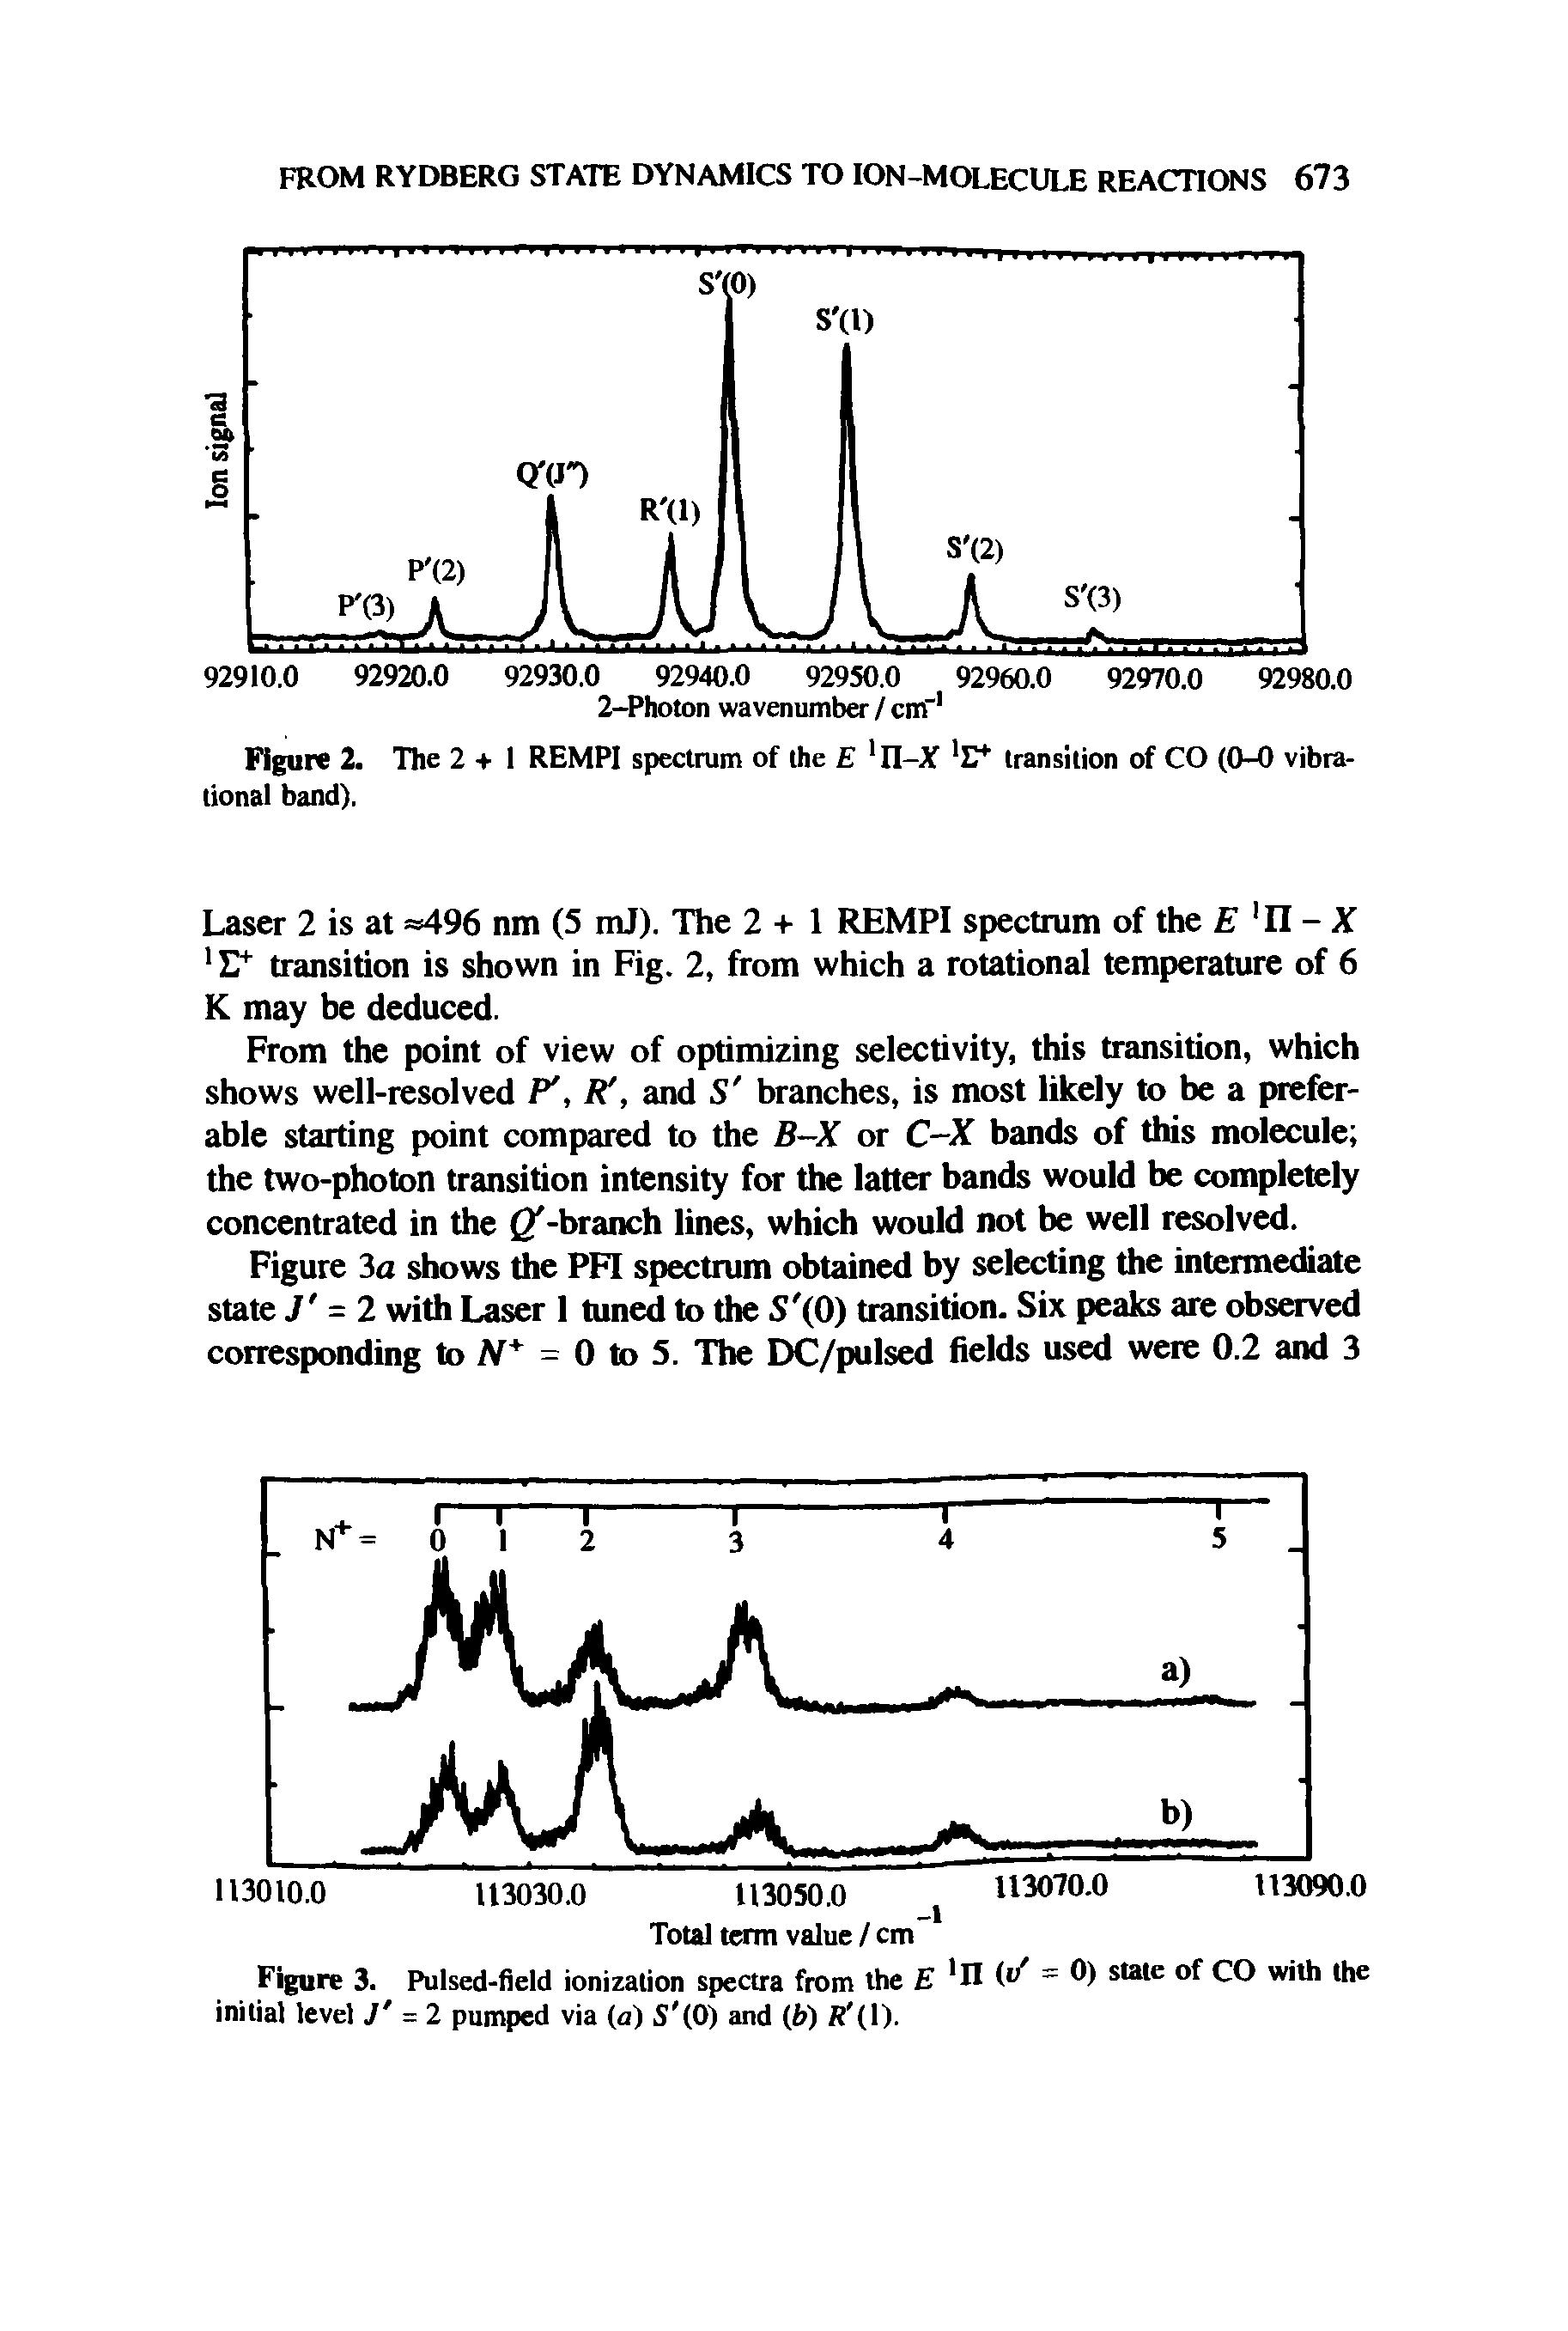 Figure 3. Pulsed-field ionization spectra from the 1II ( / — 0) state of CO with the initial level J = 2 pumped via (a) S (0) and (b) R (l).